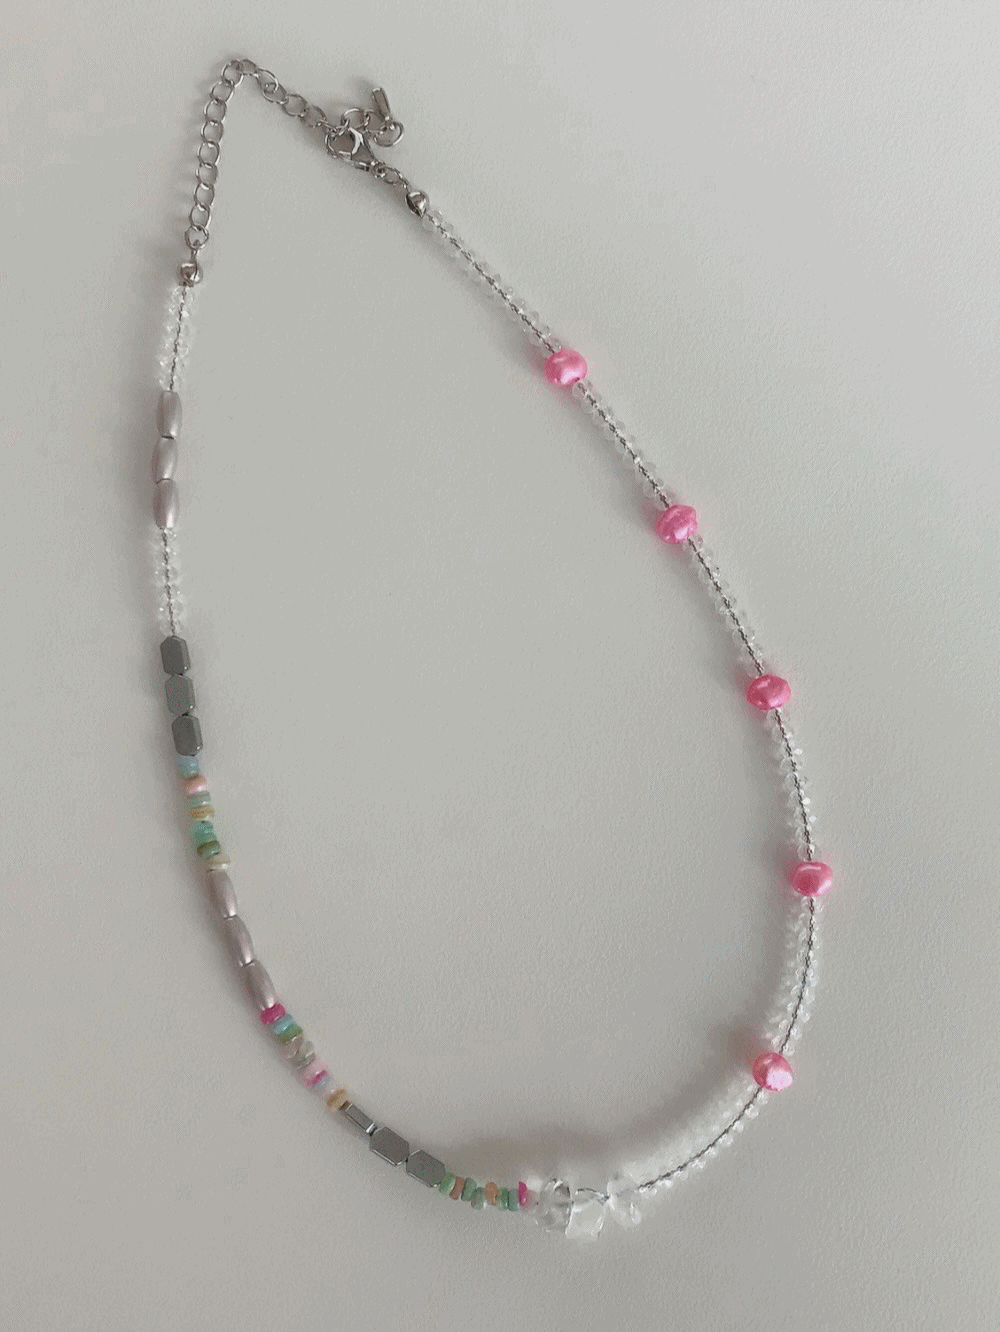 [Acc] Pony Crystal Bizz Necklace / one color